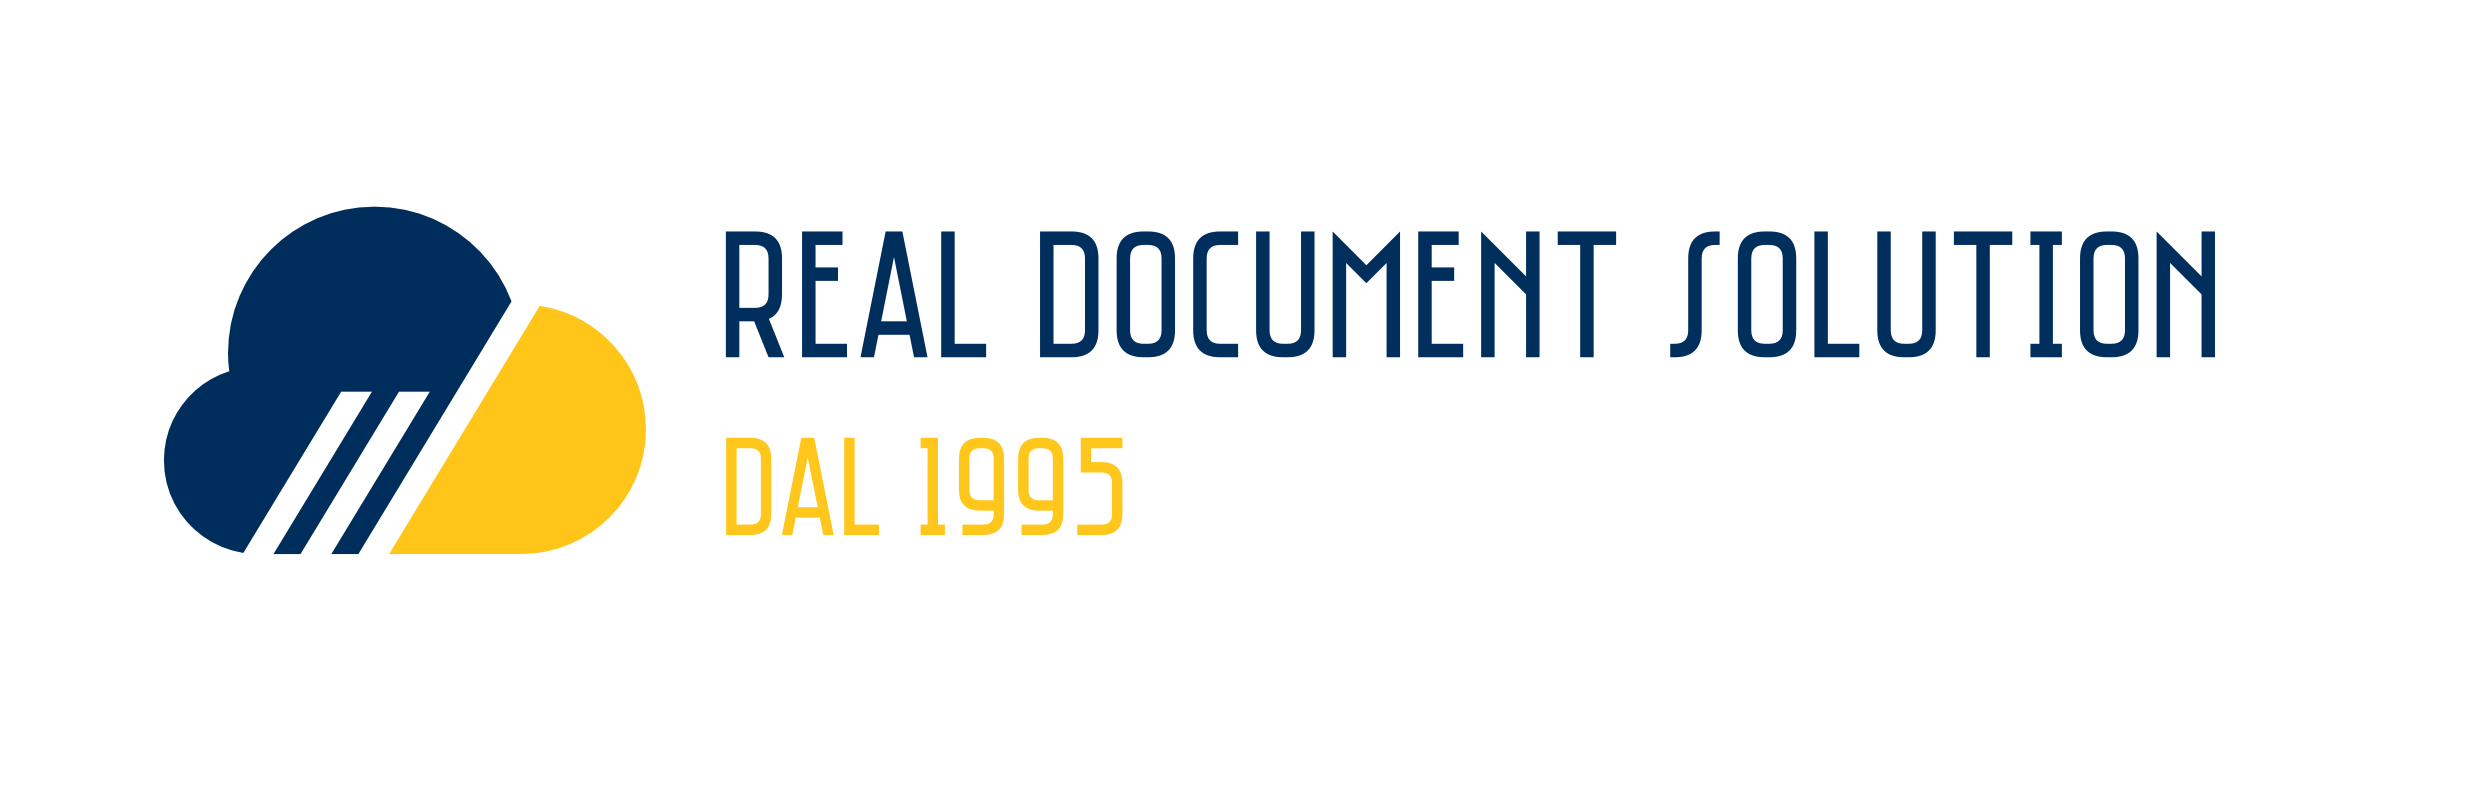 Real Document Solution-logo